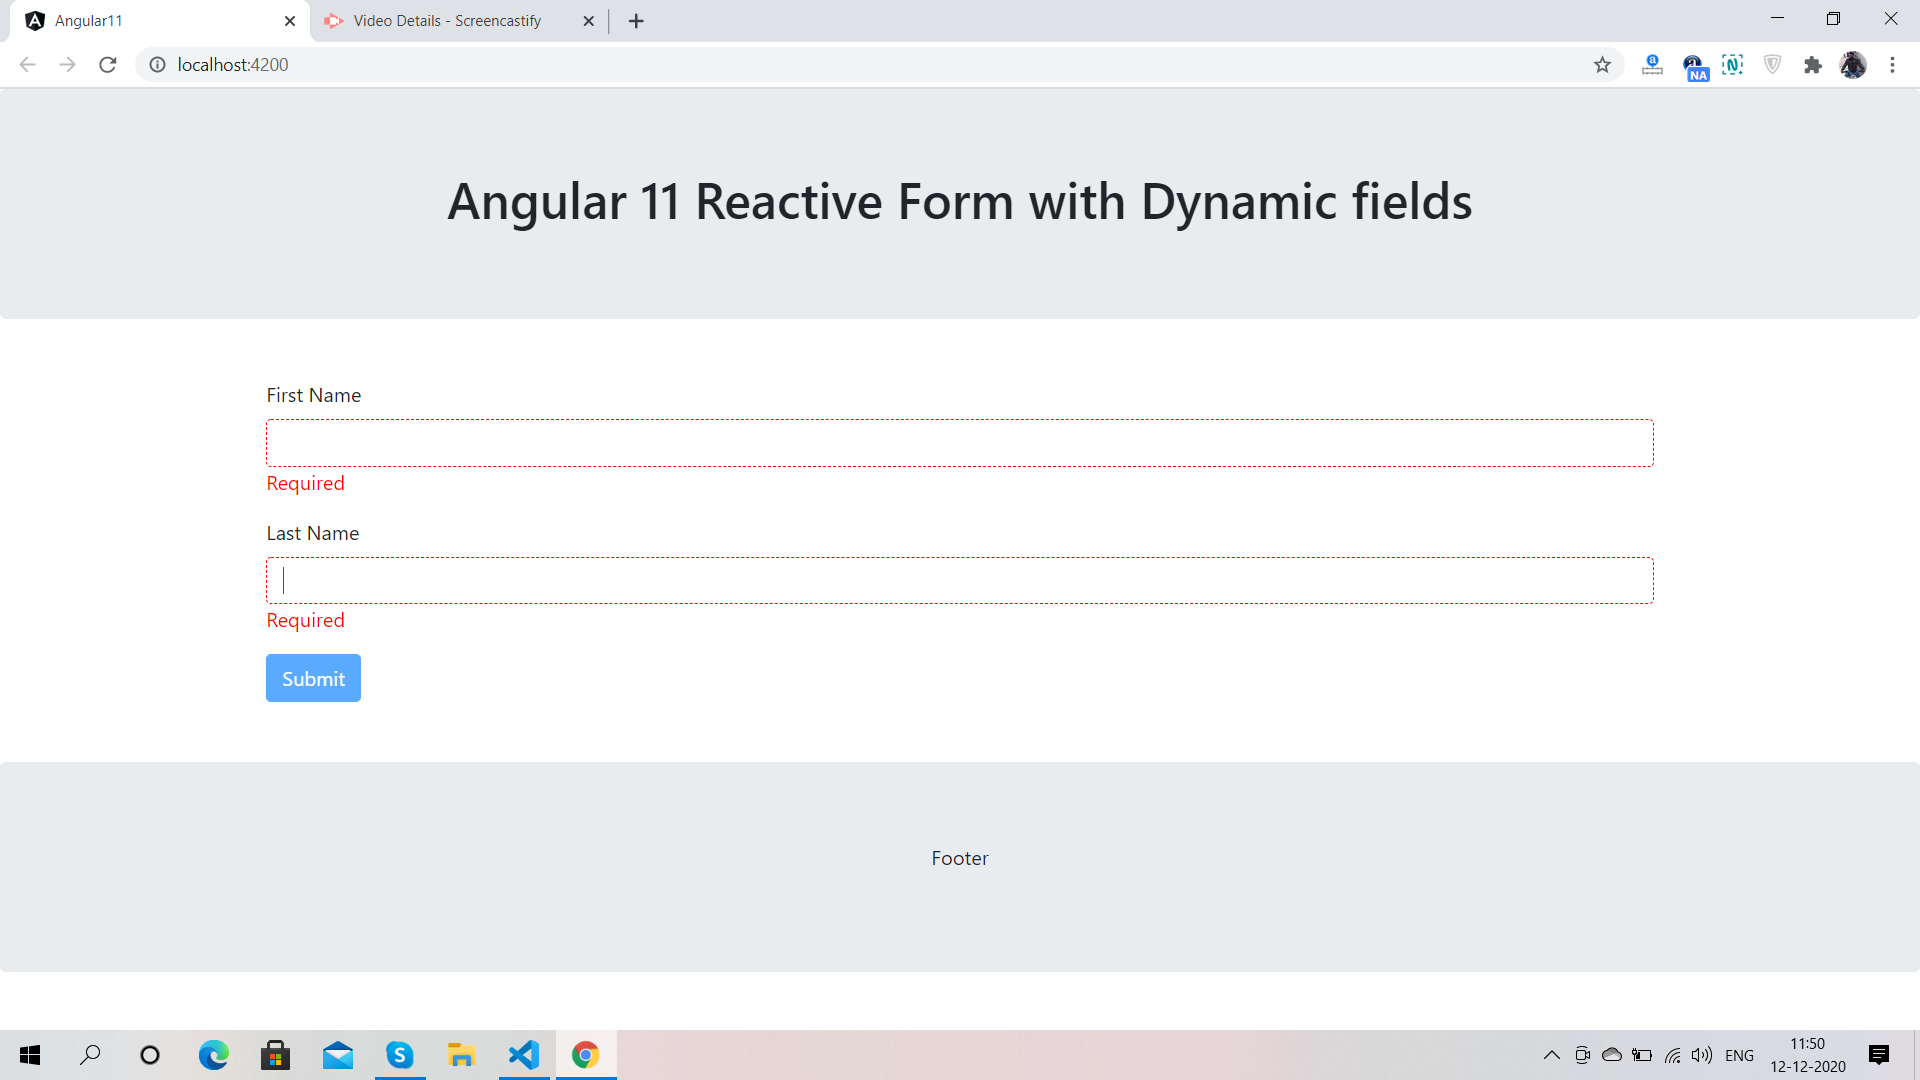 Angular 11 Reactive Form with Dynamic Fields